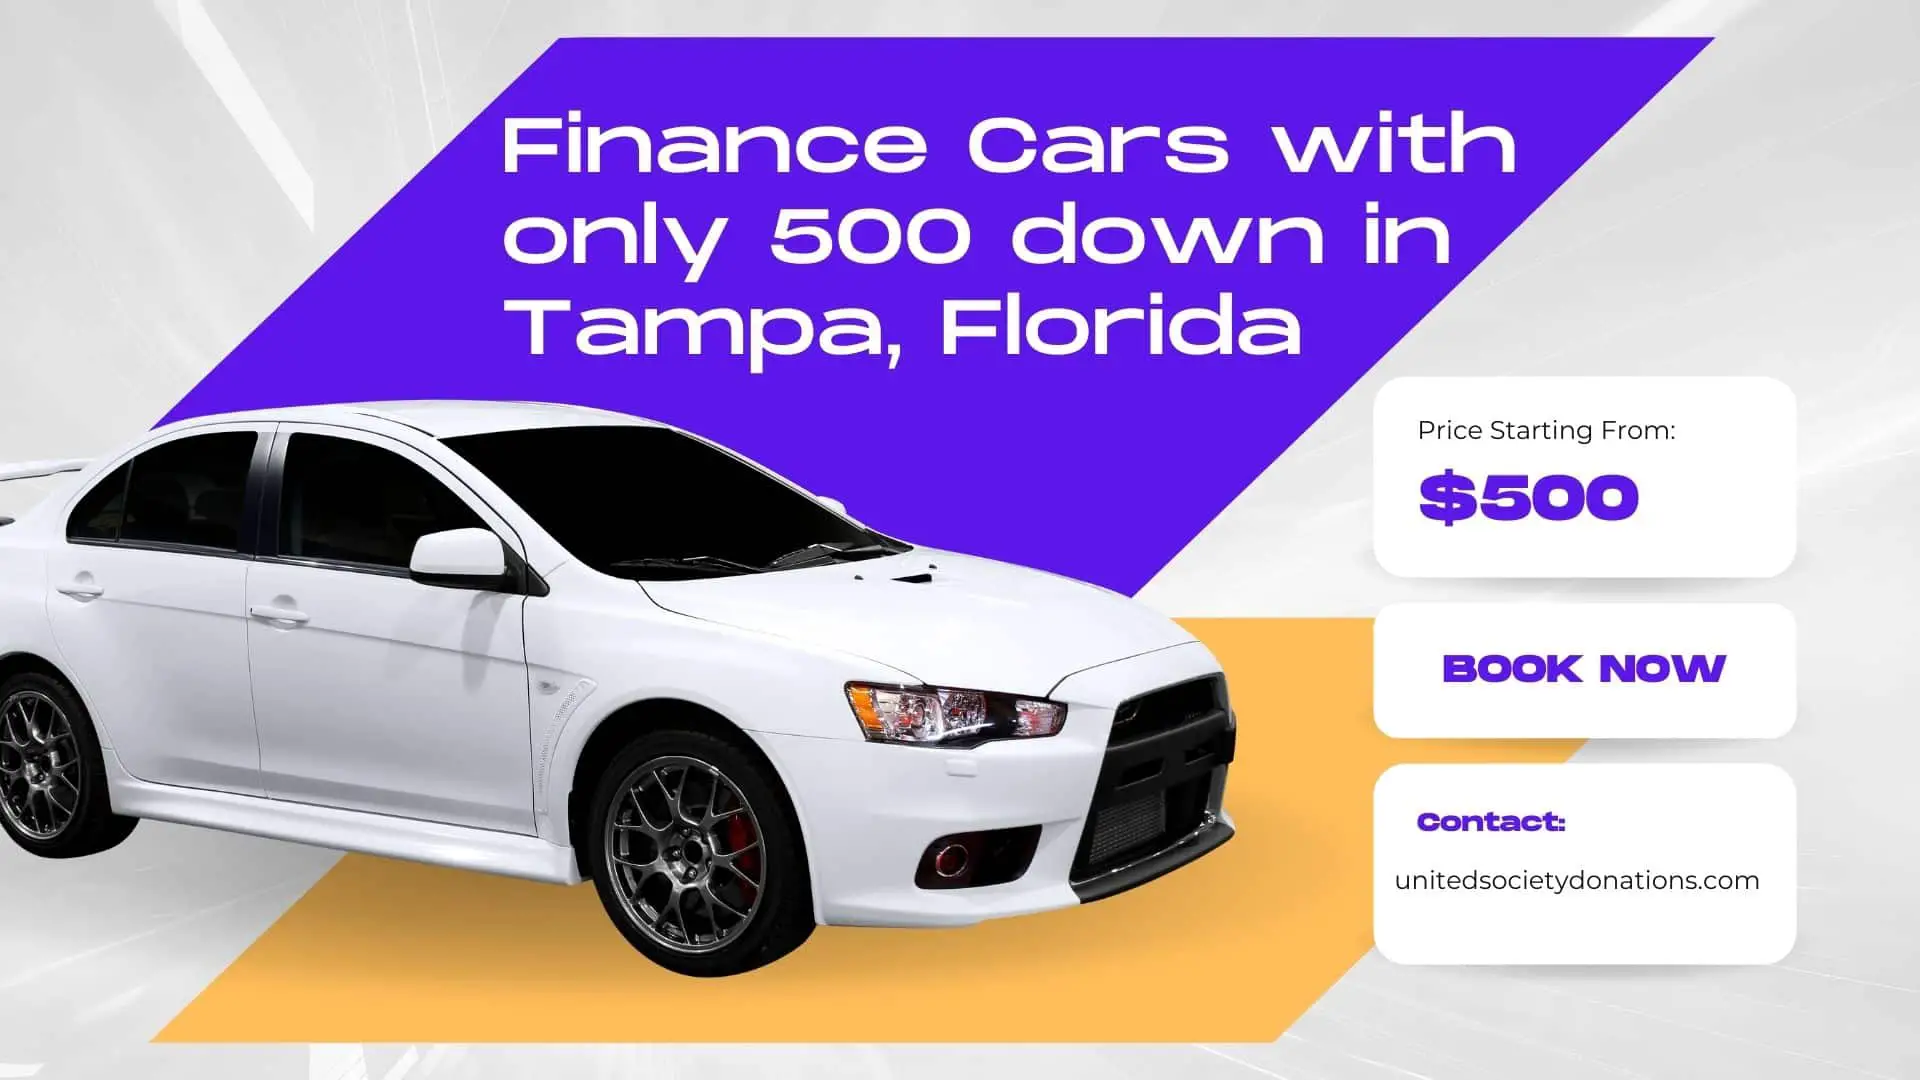 Finance Cars with only 500 down in Tampa, Florida